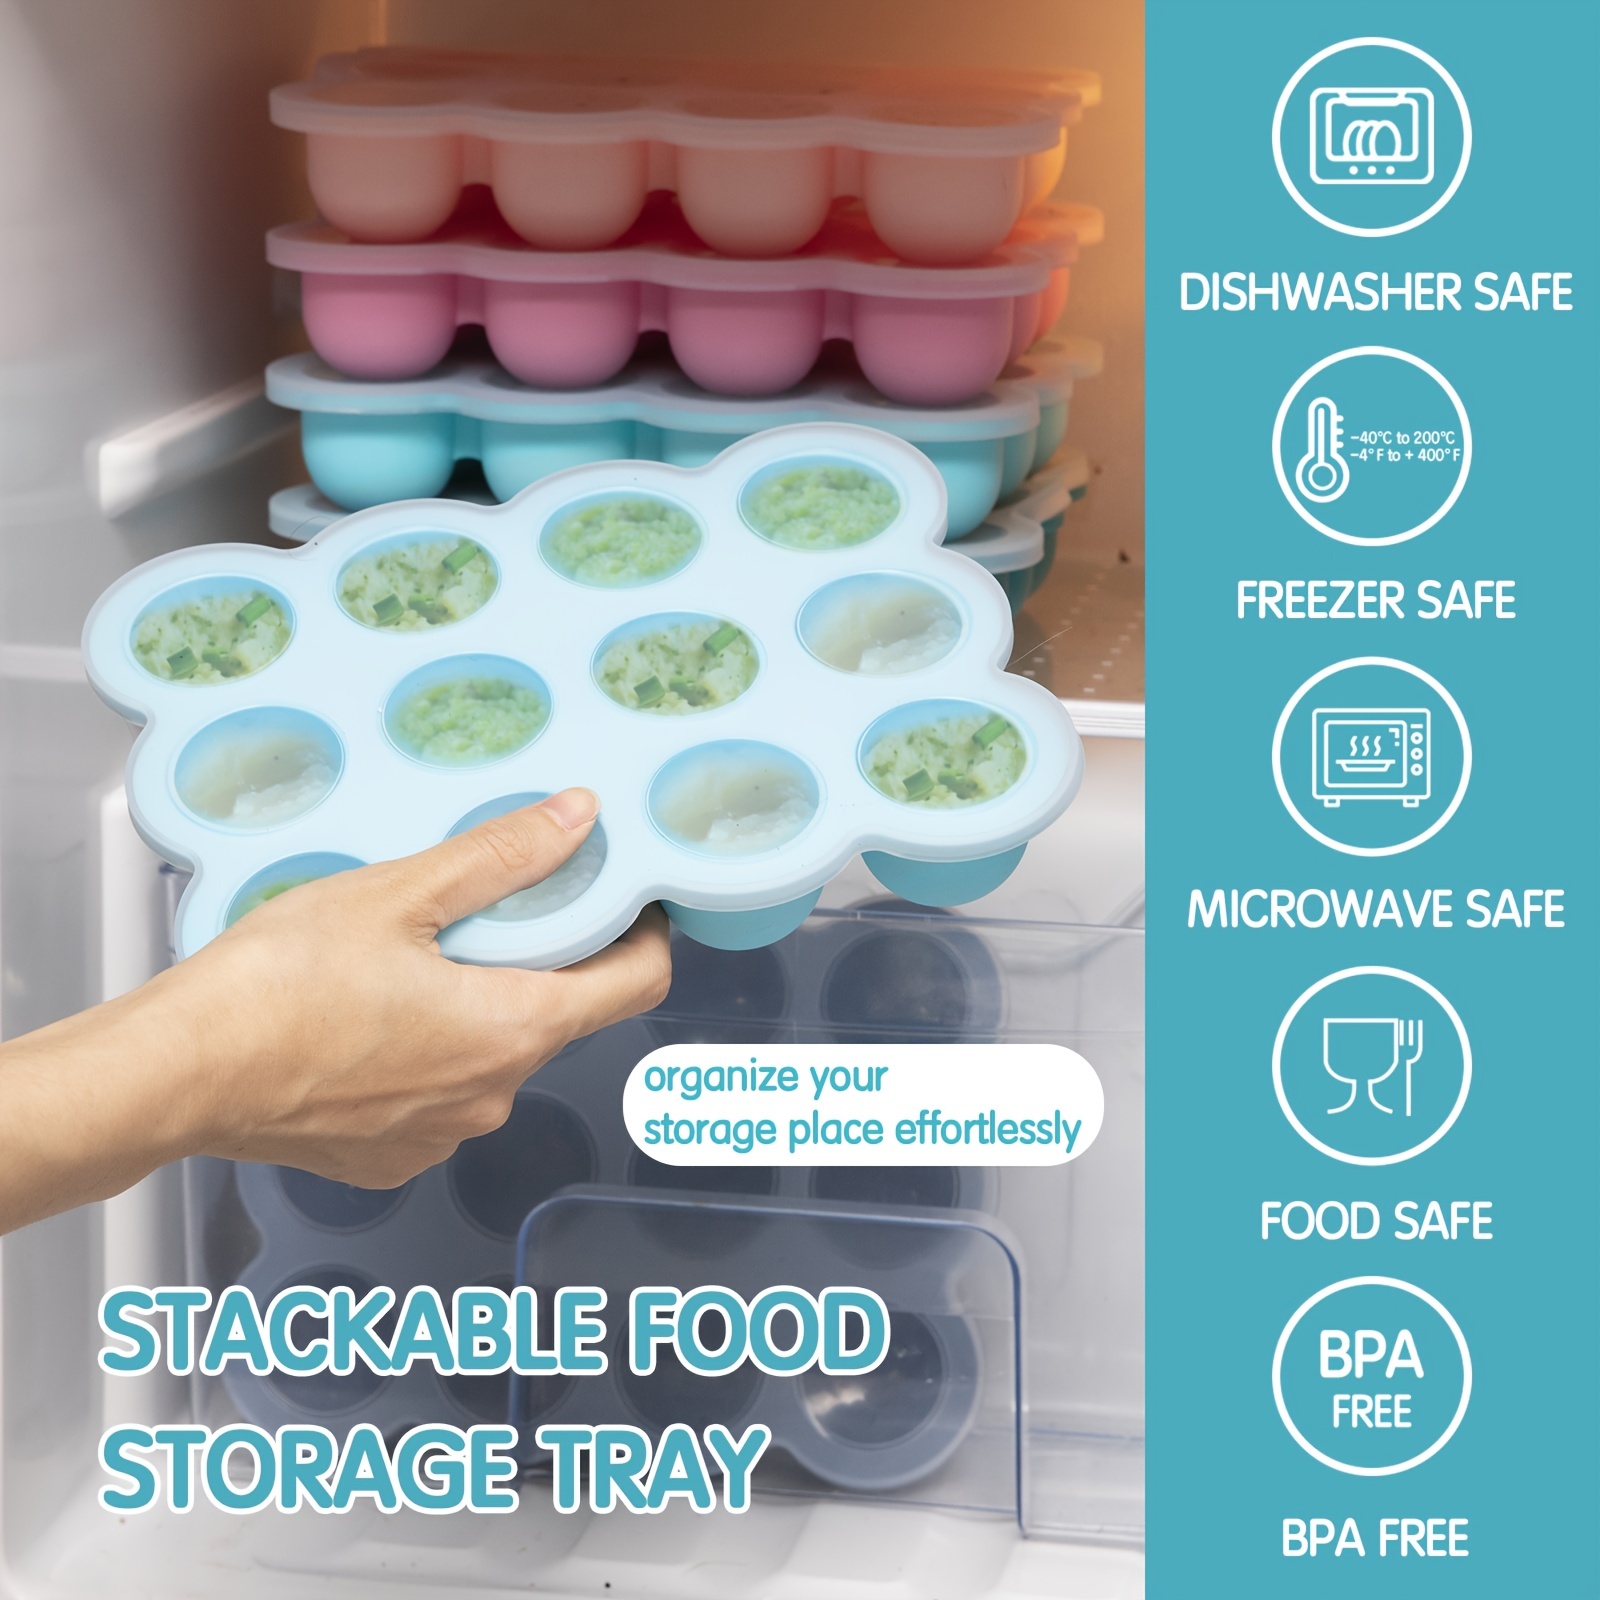 Silicone Baby Food Storage, Oven Safe Baking Containers with Lids, Leak  Resistant Airtight Lids, Microwave and Freezer Safe